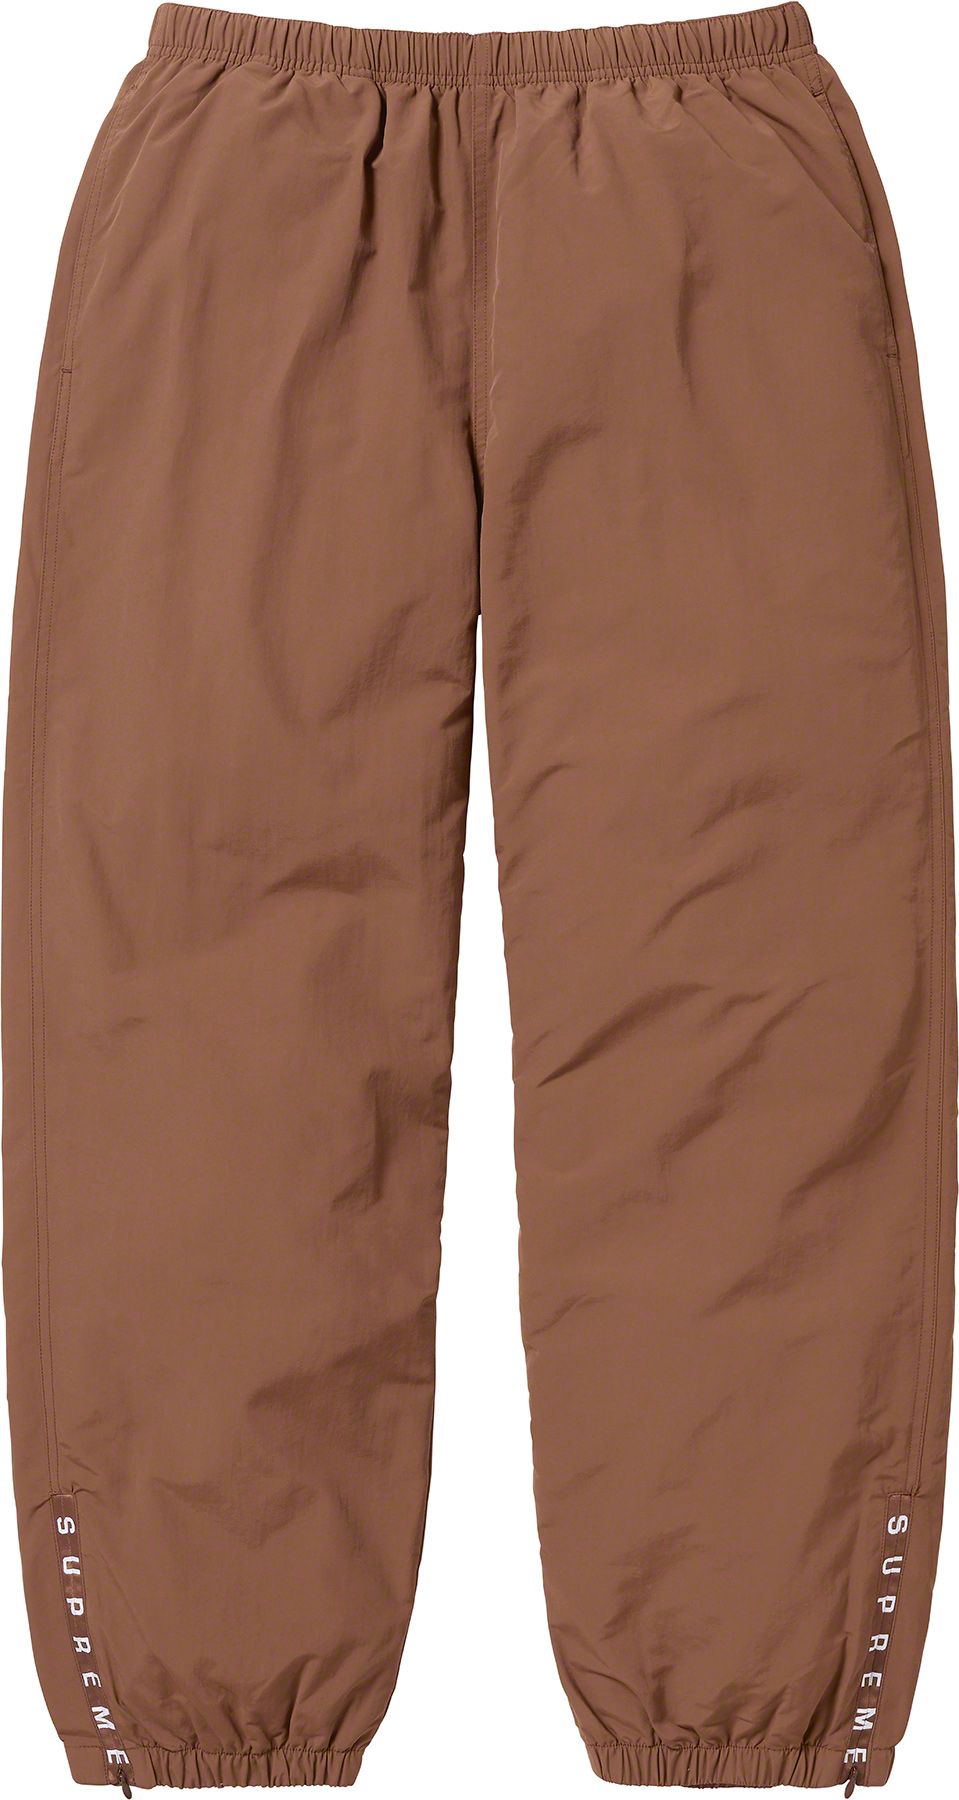 Supreme S Paneled Belted Track Pant - Brown - Men’s Size Small S - Brand  New 